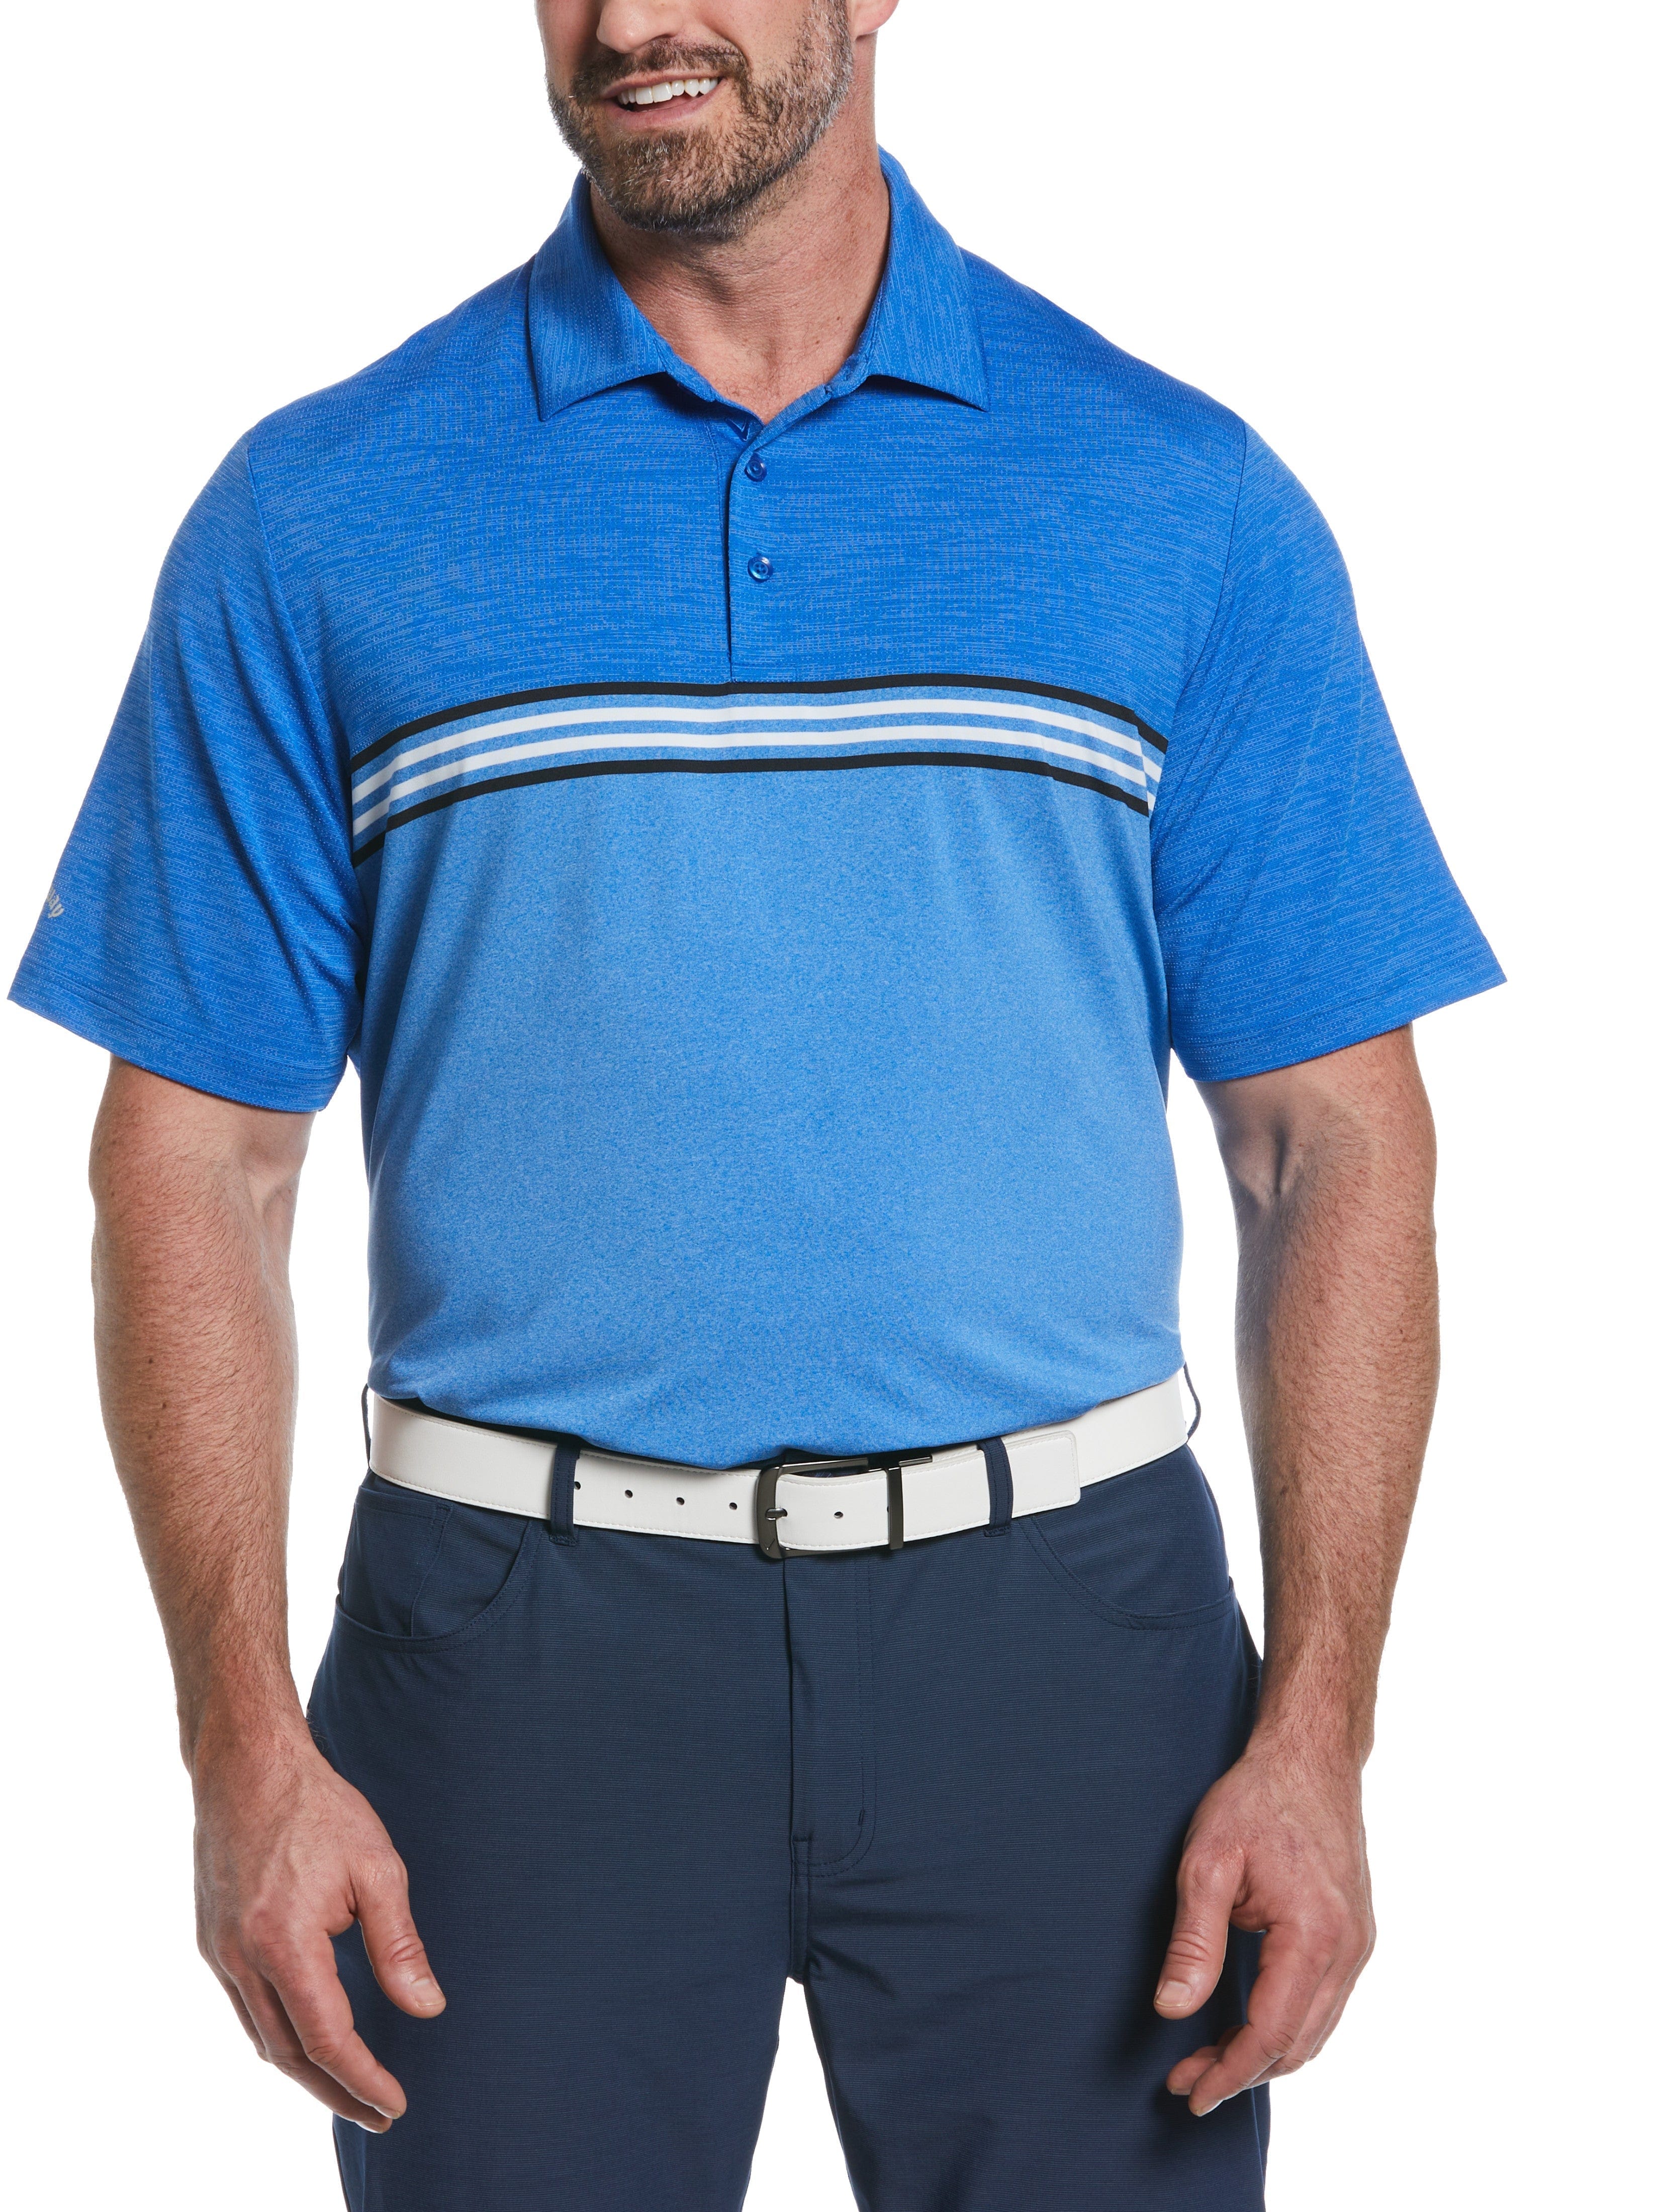 Callaway Apparel Mens Big & Tall Yarn Dyed Ventilated Jaspe Engineered Stripe Golf Polo Shirt, Size XLT, Magnetic Heather Blue, Polyester/Recycled Po